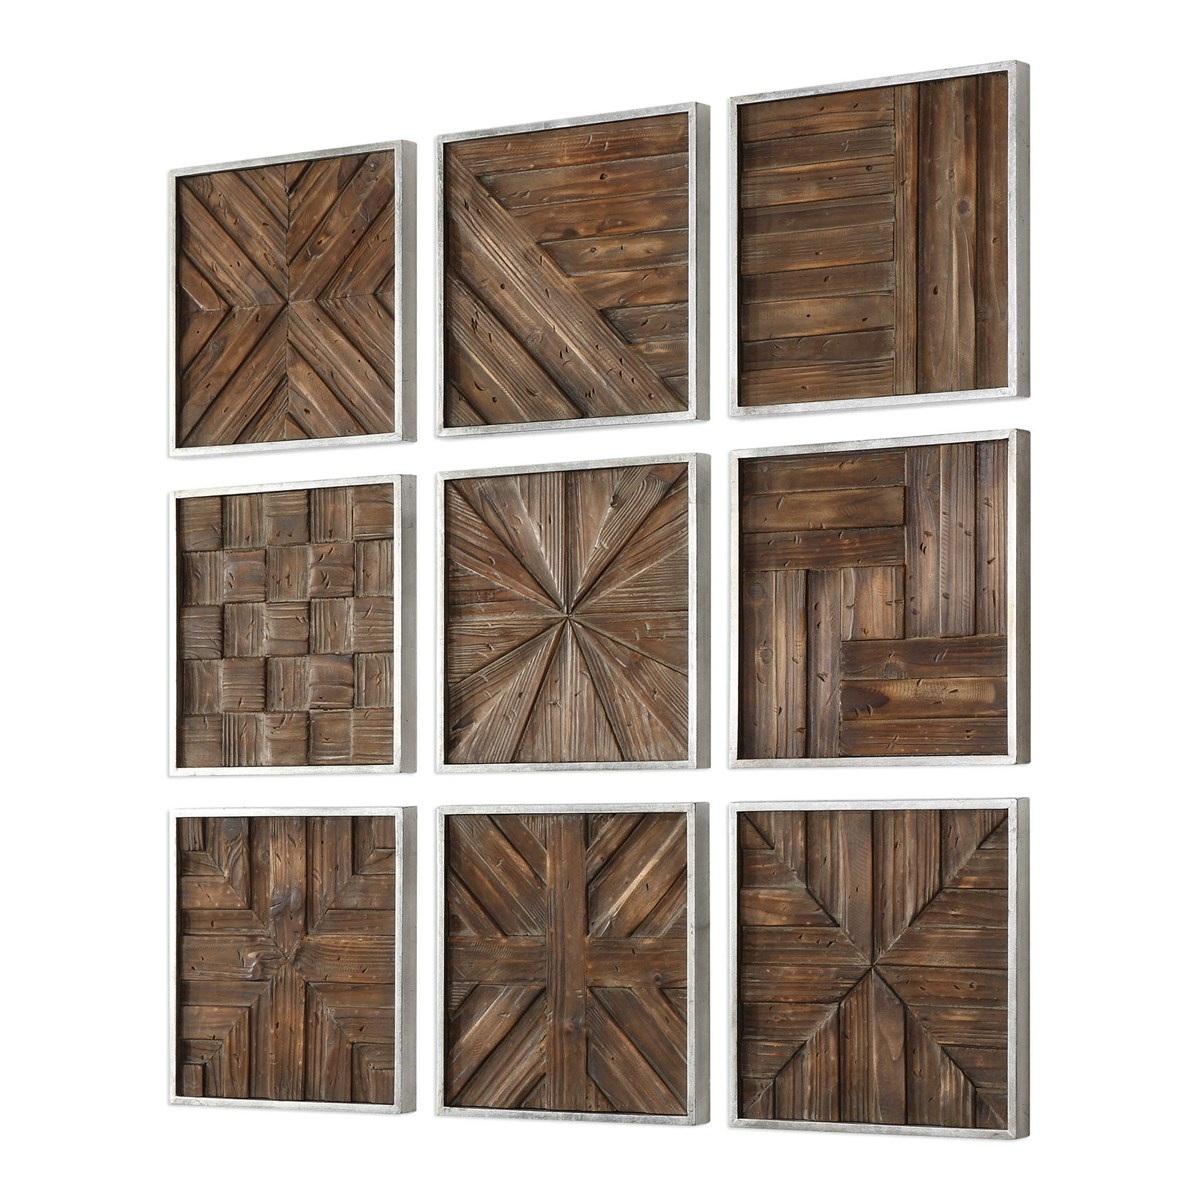 Bryndle Squares Metal Wall Decor S/9 - Image 2